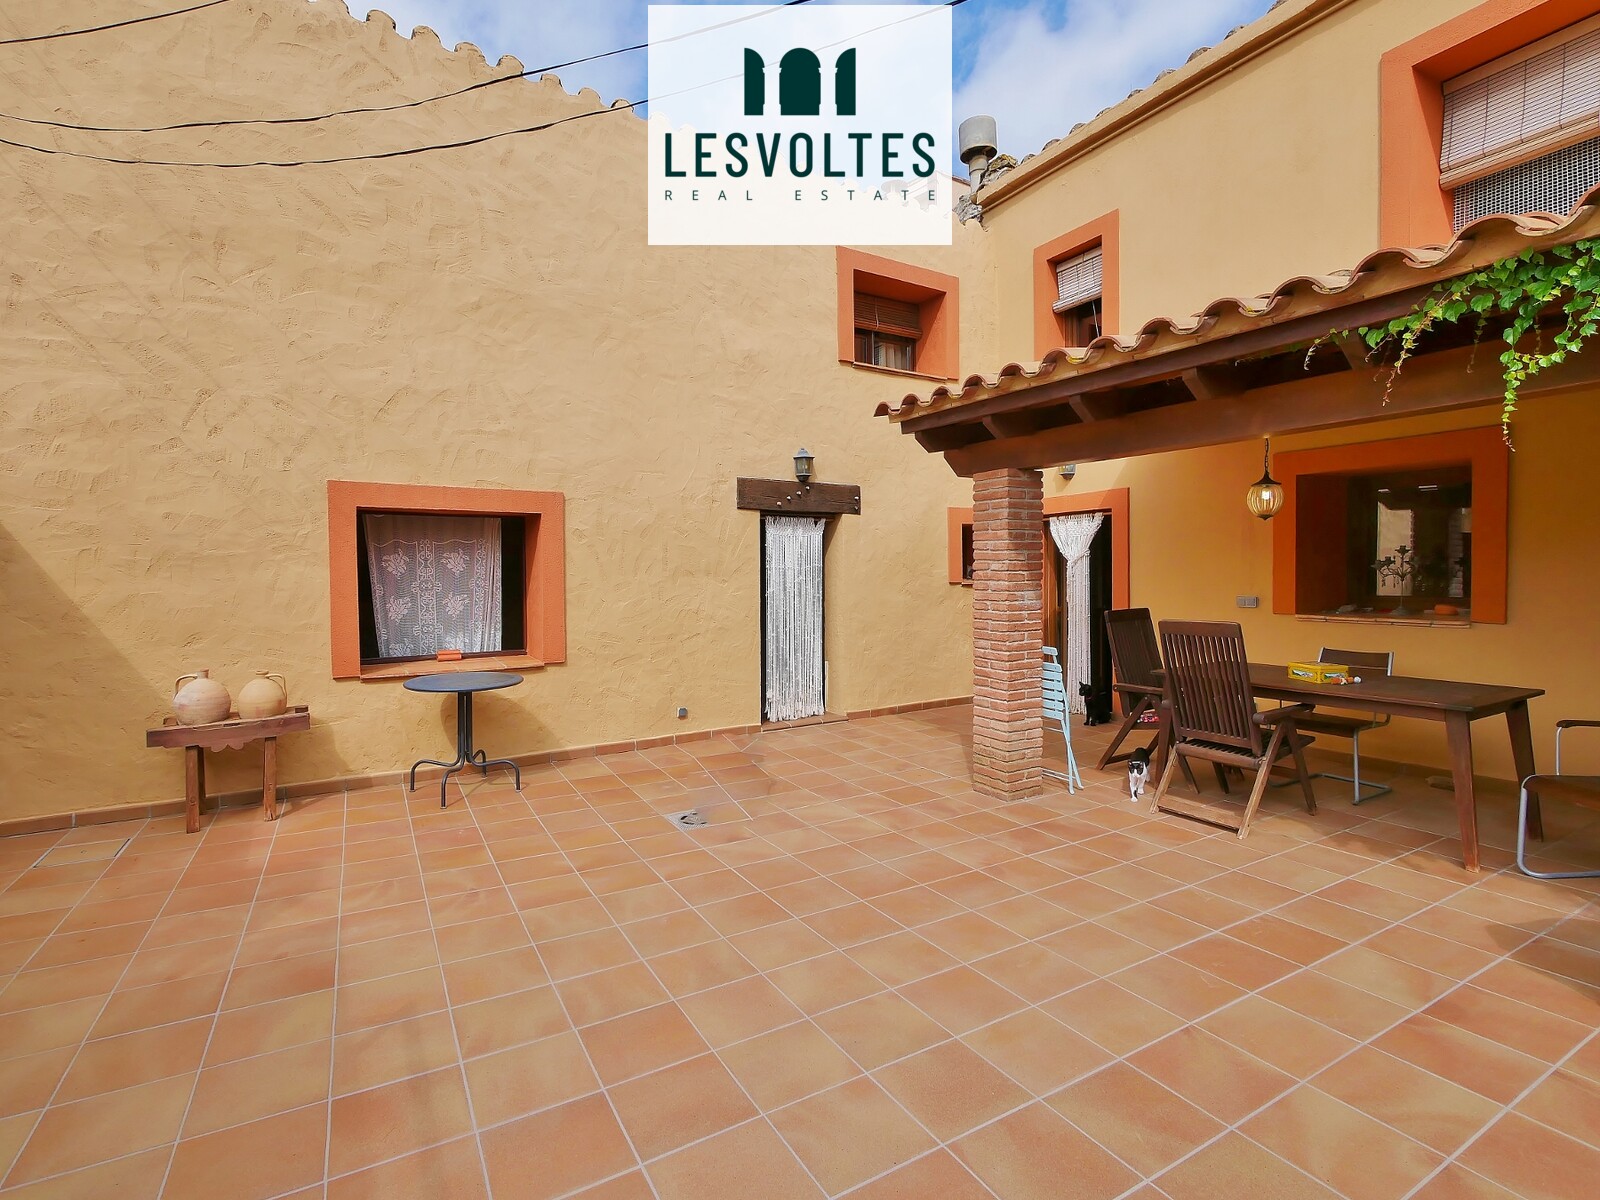 RUSTIC STYLE HOUSE FULLY RENOVATED WITH PATIO AND ANNEX IN PALAFRUGELL.